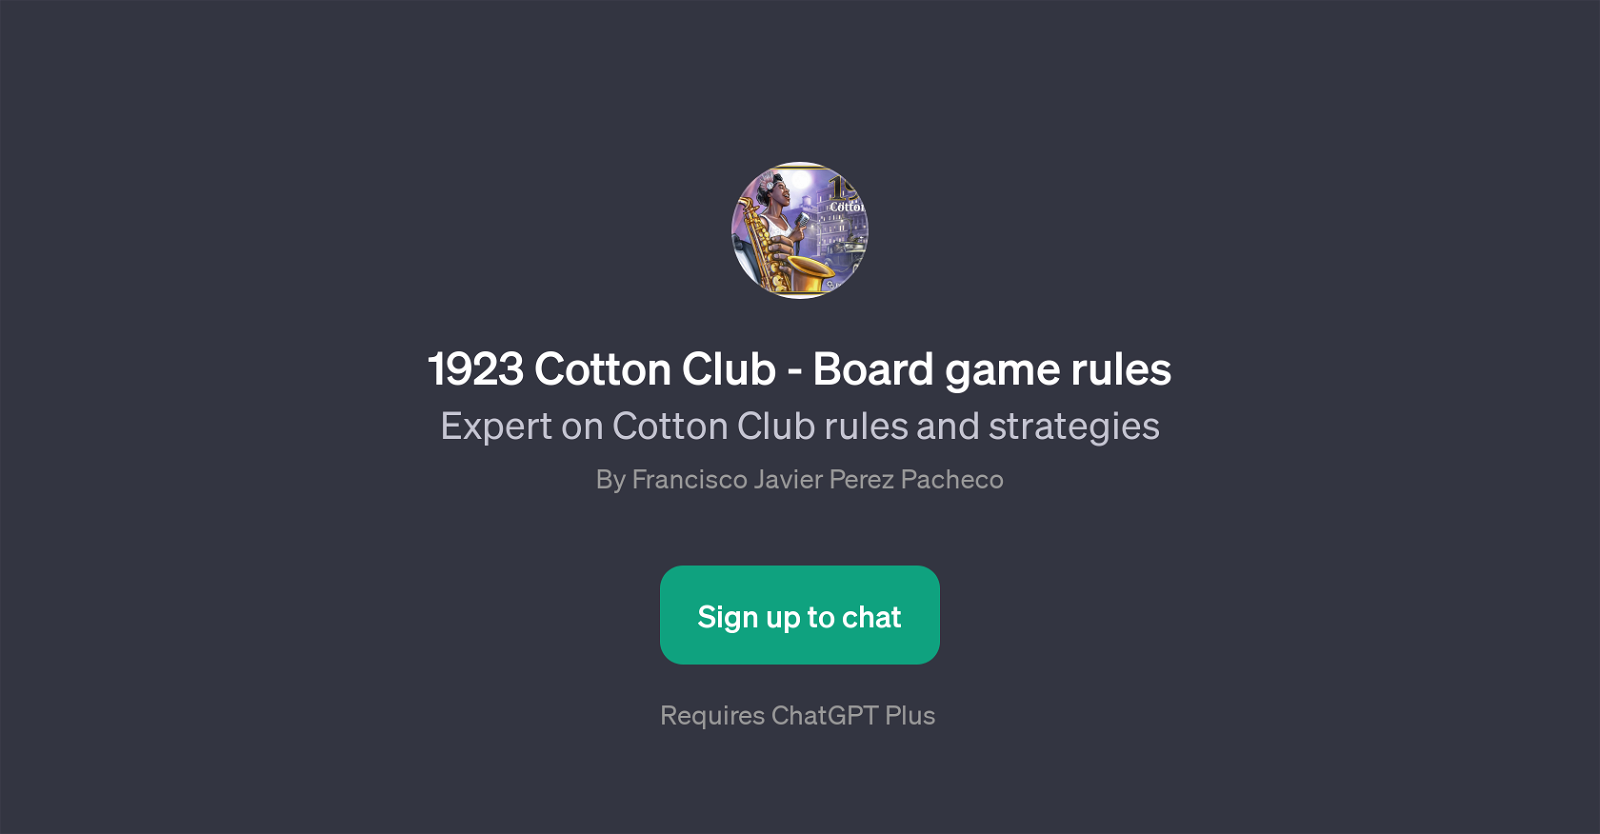 1923 Cotton Club - Board game rules website